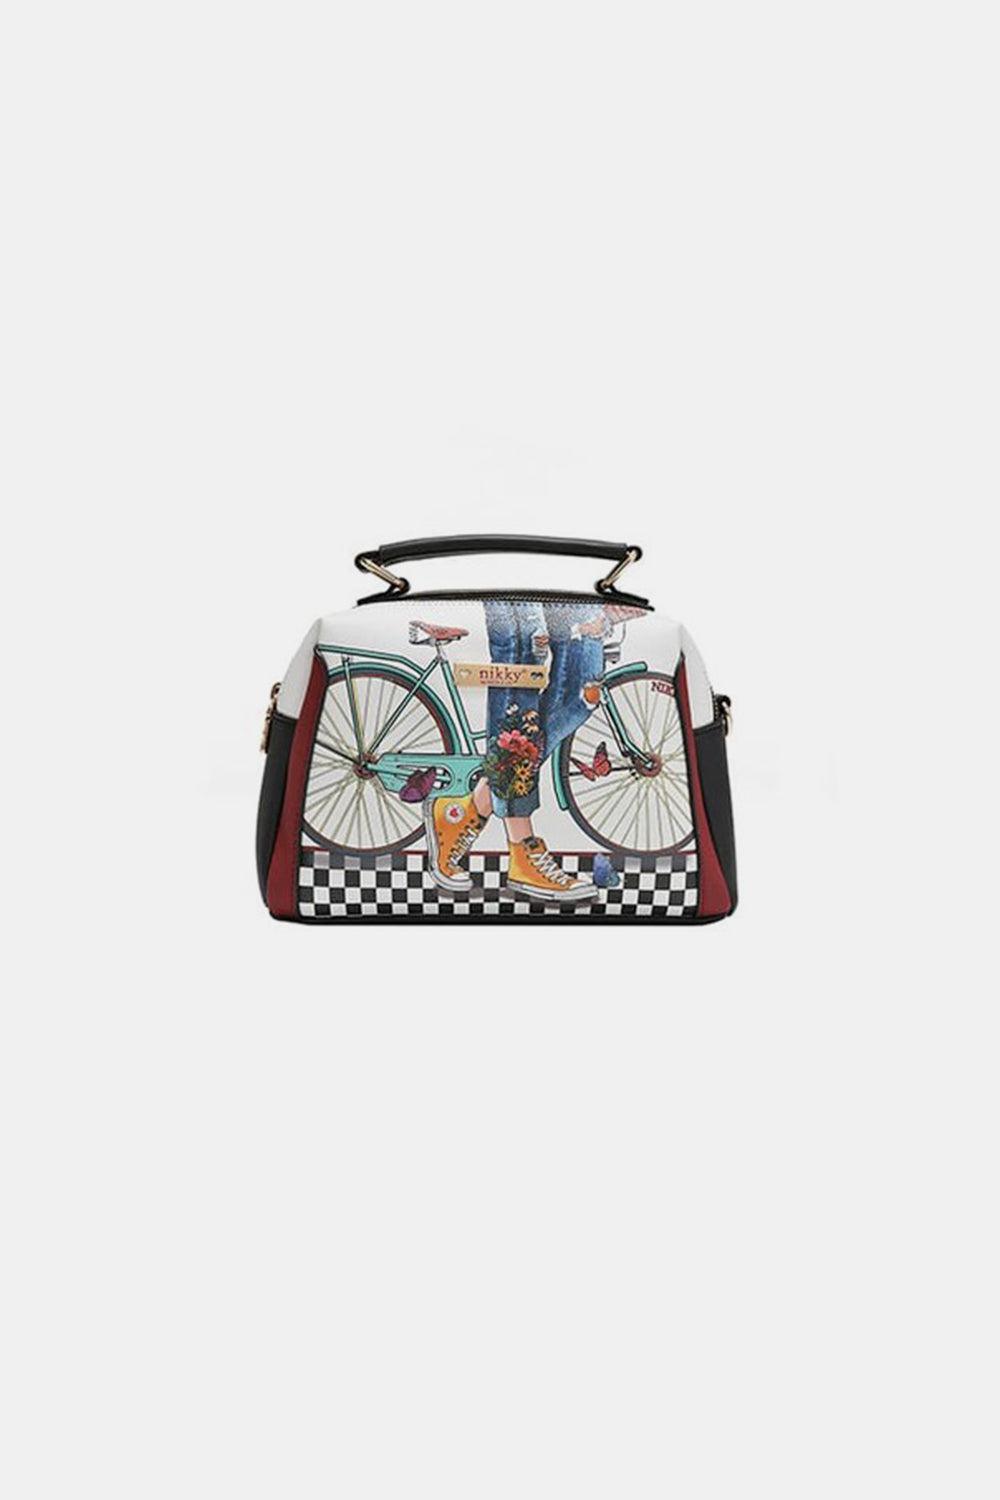 a handbag with a picture of a man on a bicycle